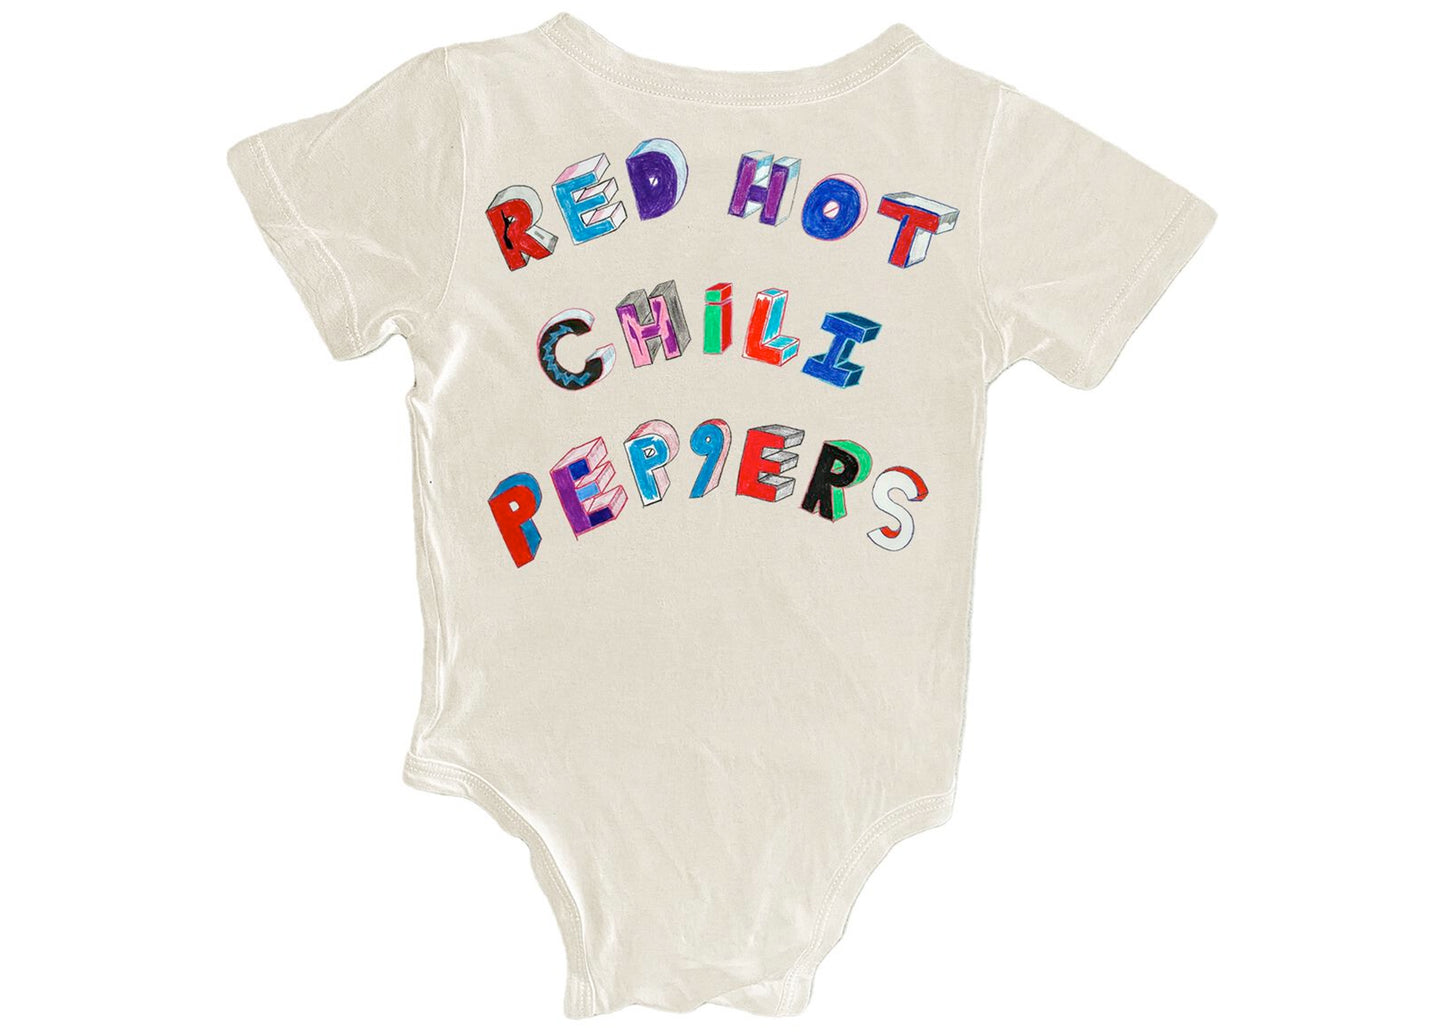 Red Hot Chili Peppers Block Letters Baby Onesie